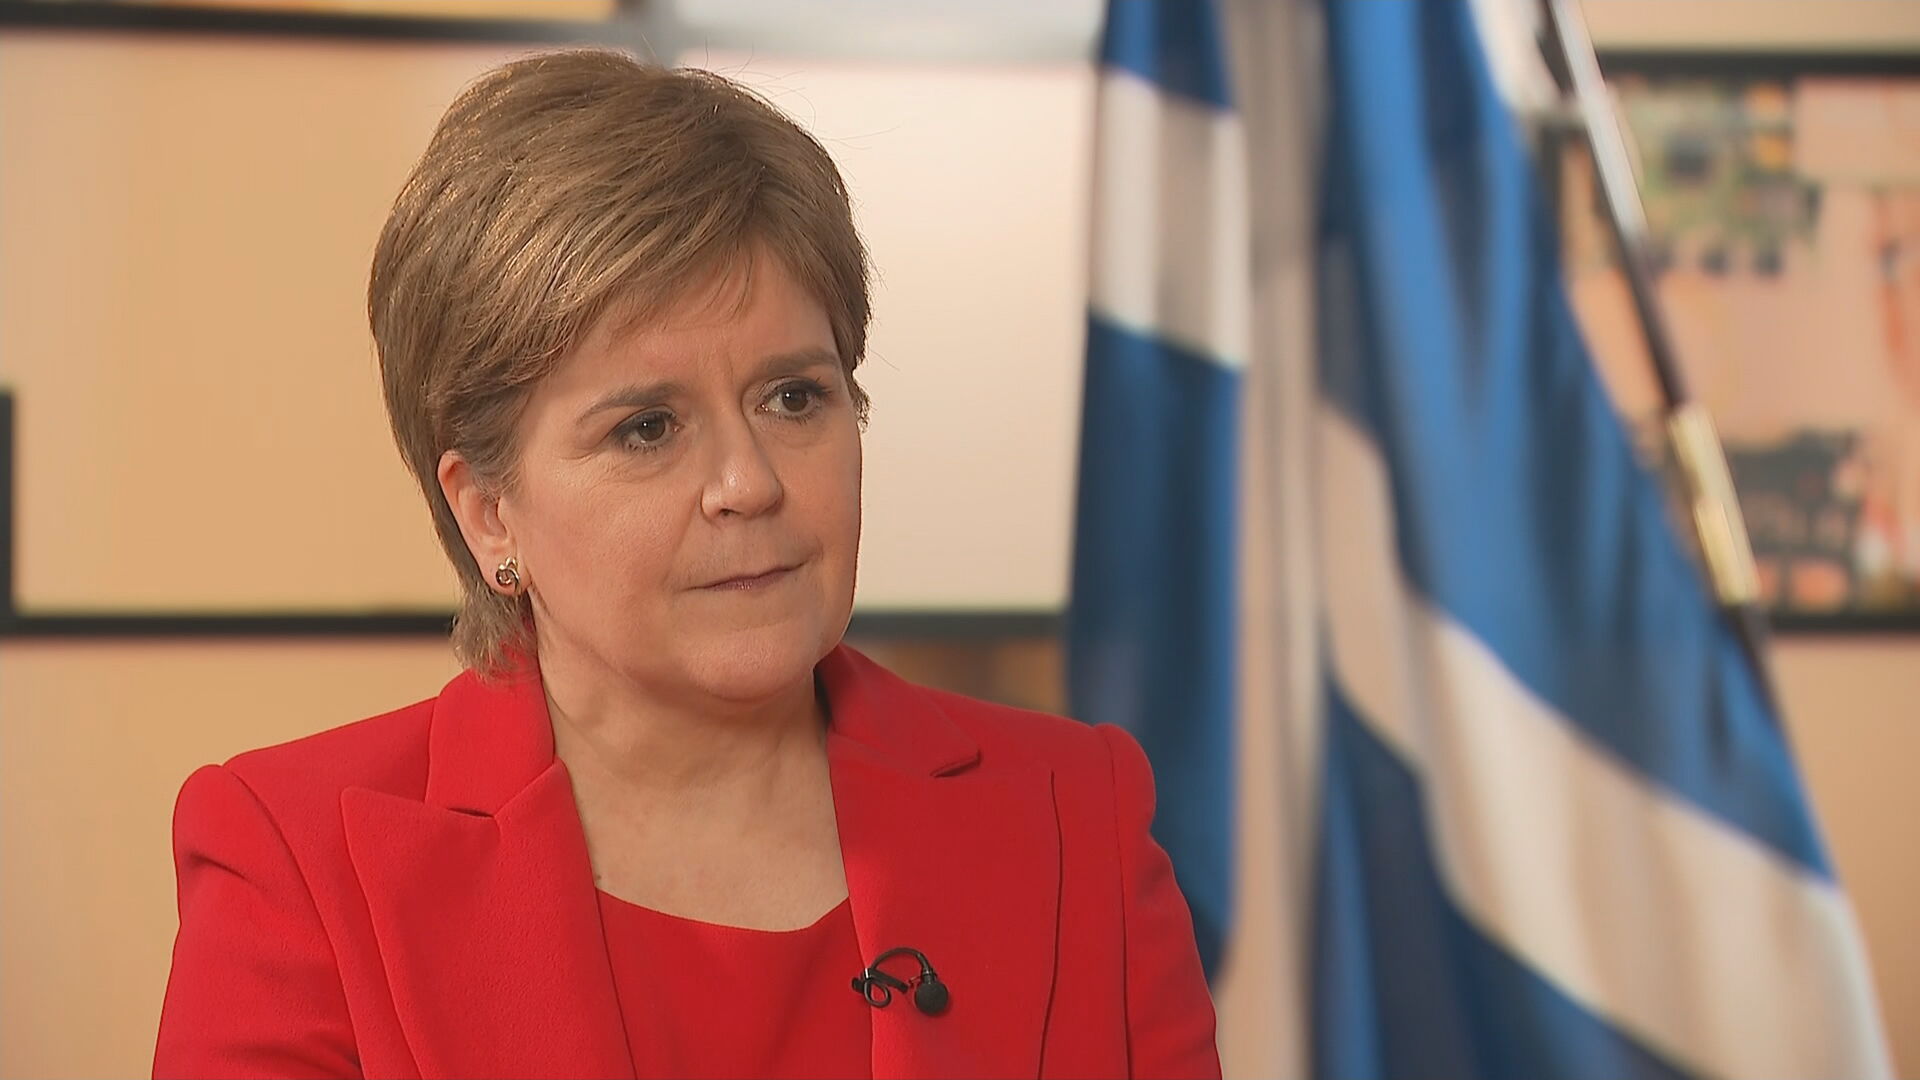 Nicola Sturgeon said she will fully cooperate with the Police Scotland investigation.